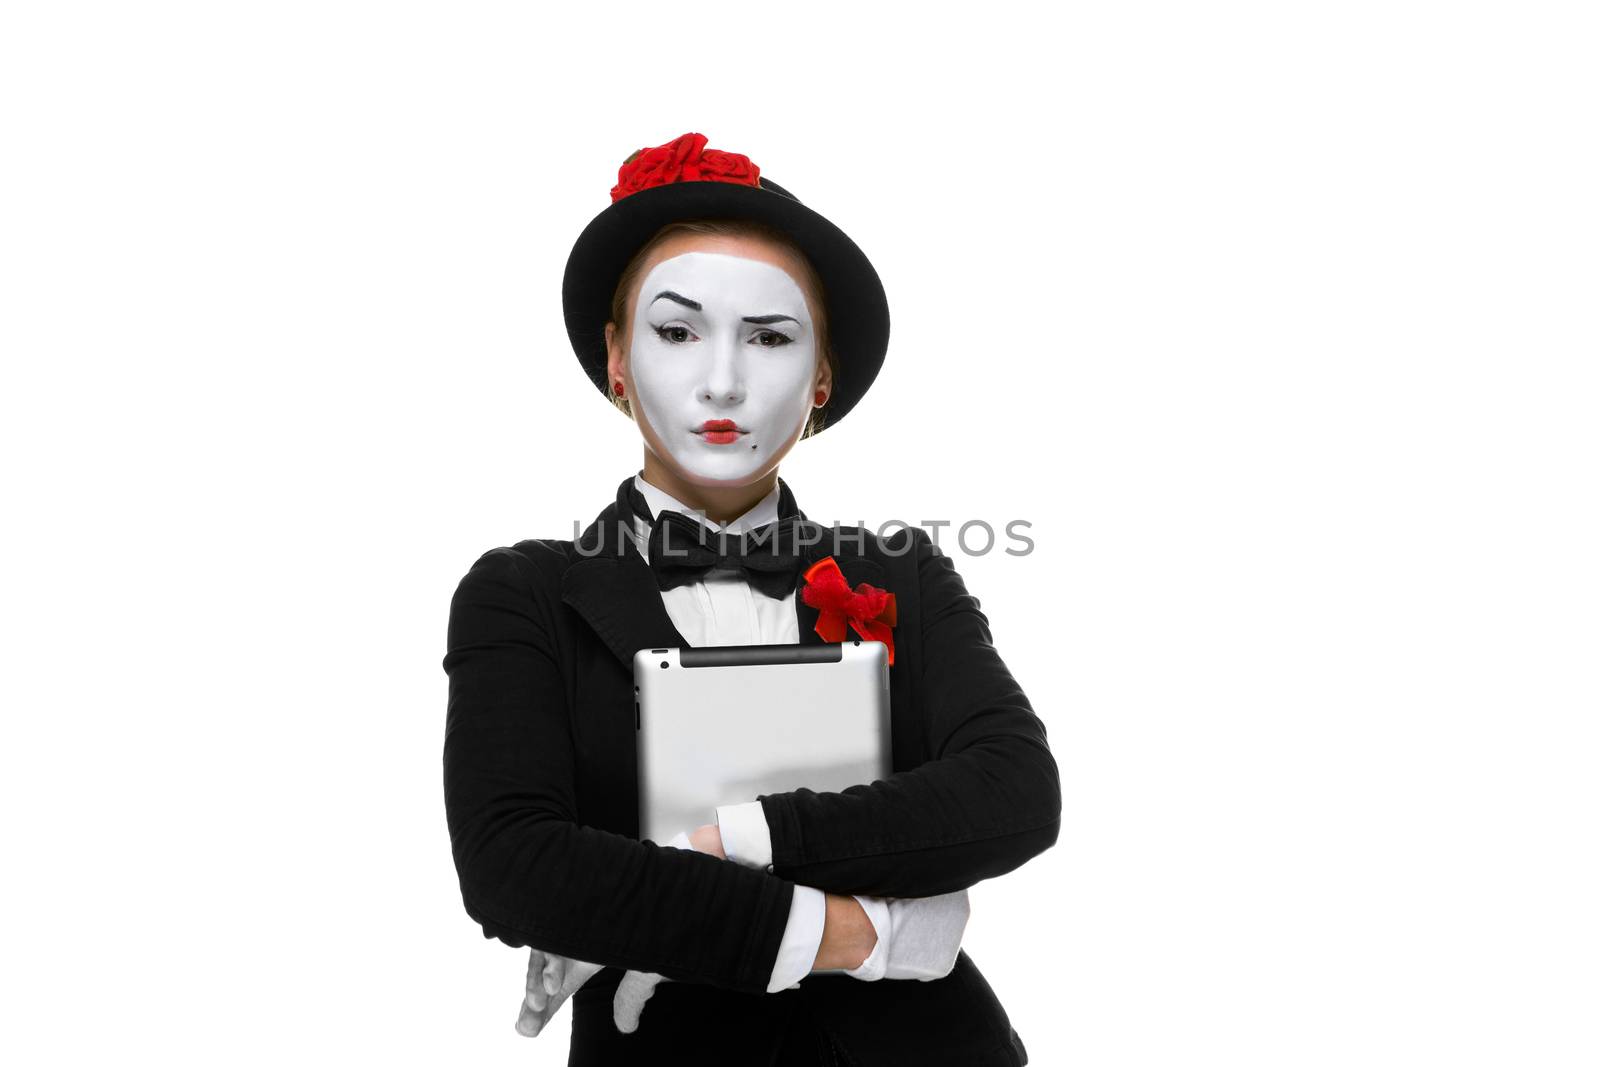 business woman in the image mime holding tablet PC by master1305